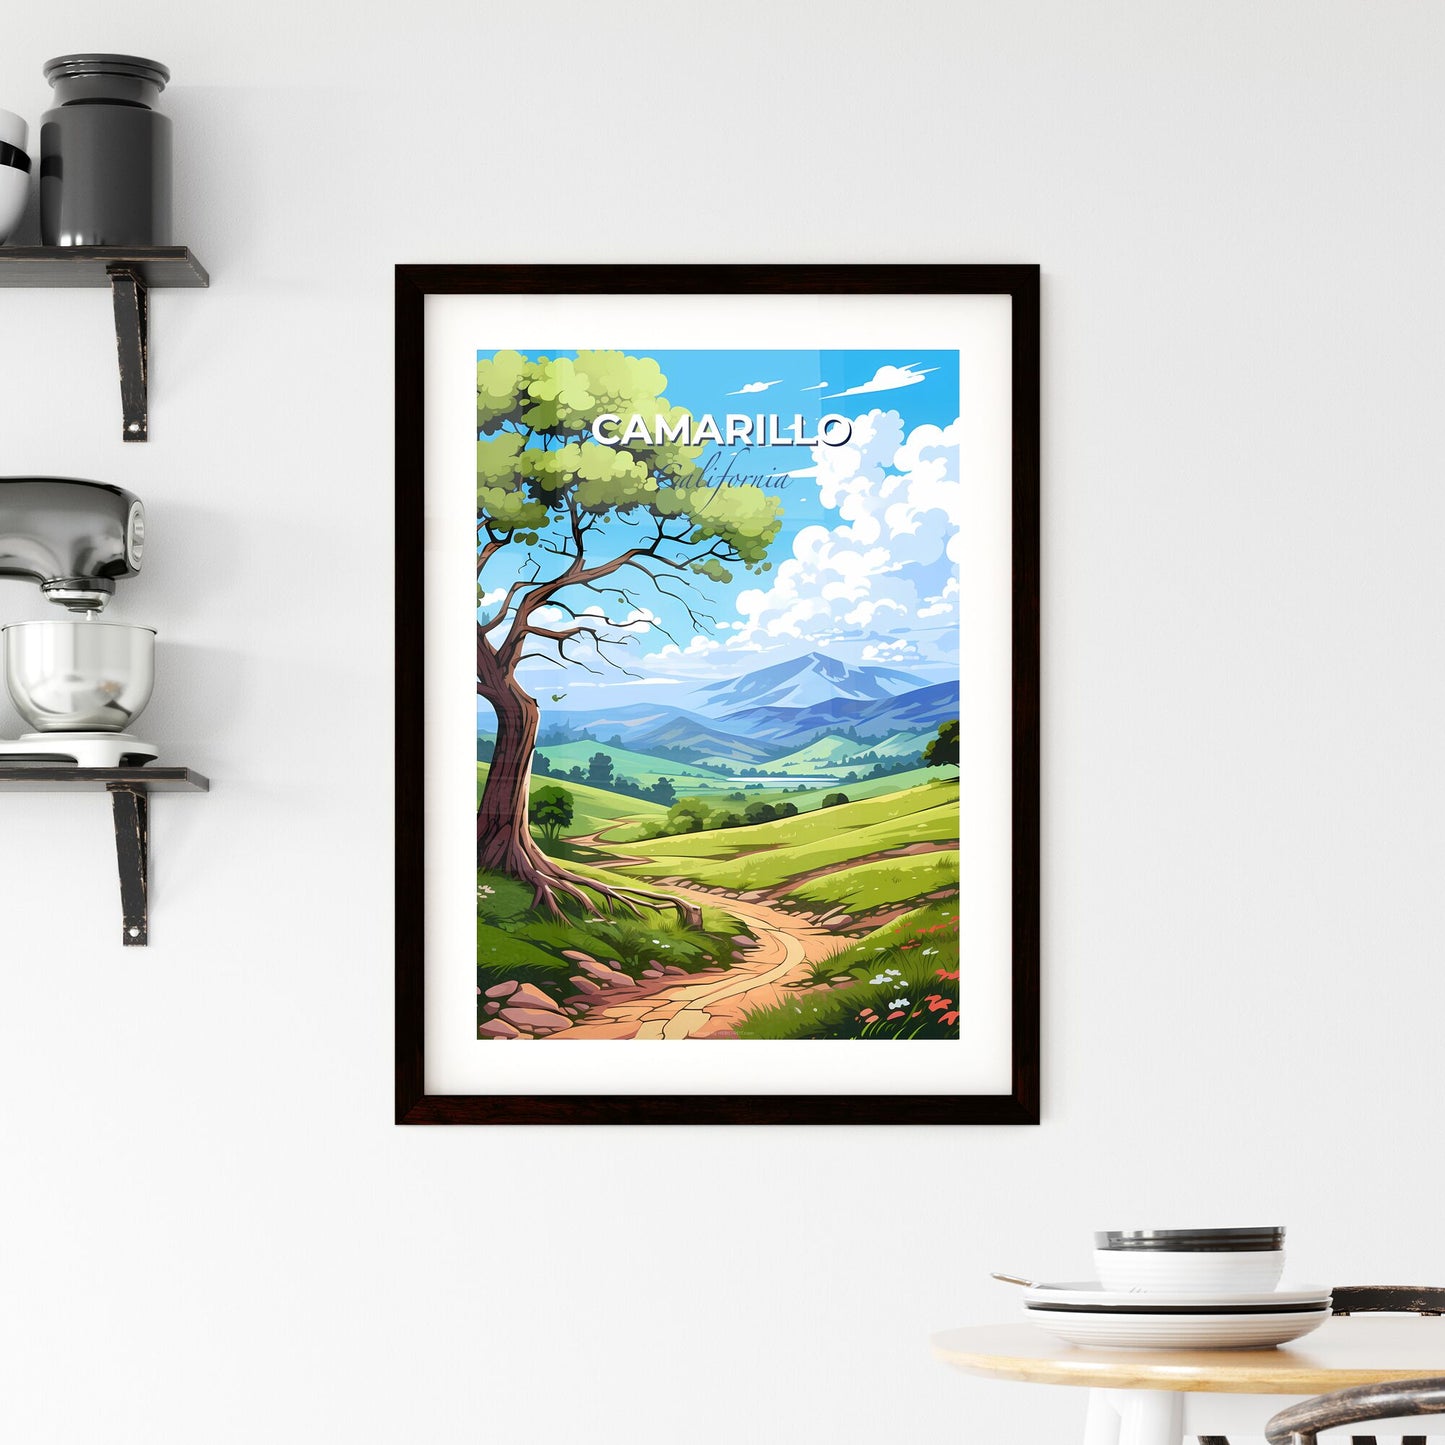 Camarillo, California, A Poster of a landscape with a tree and a dirt road Default Title